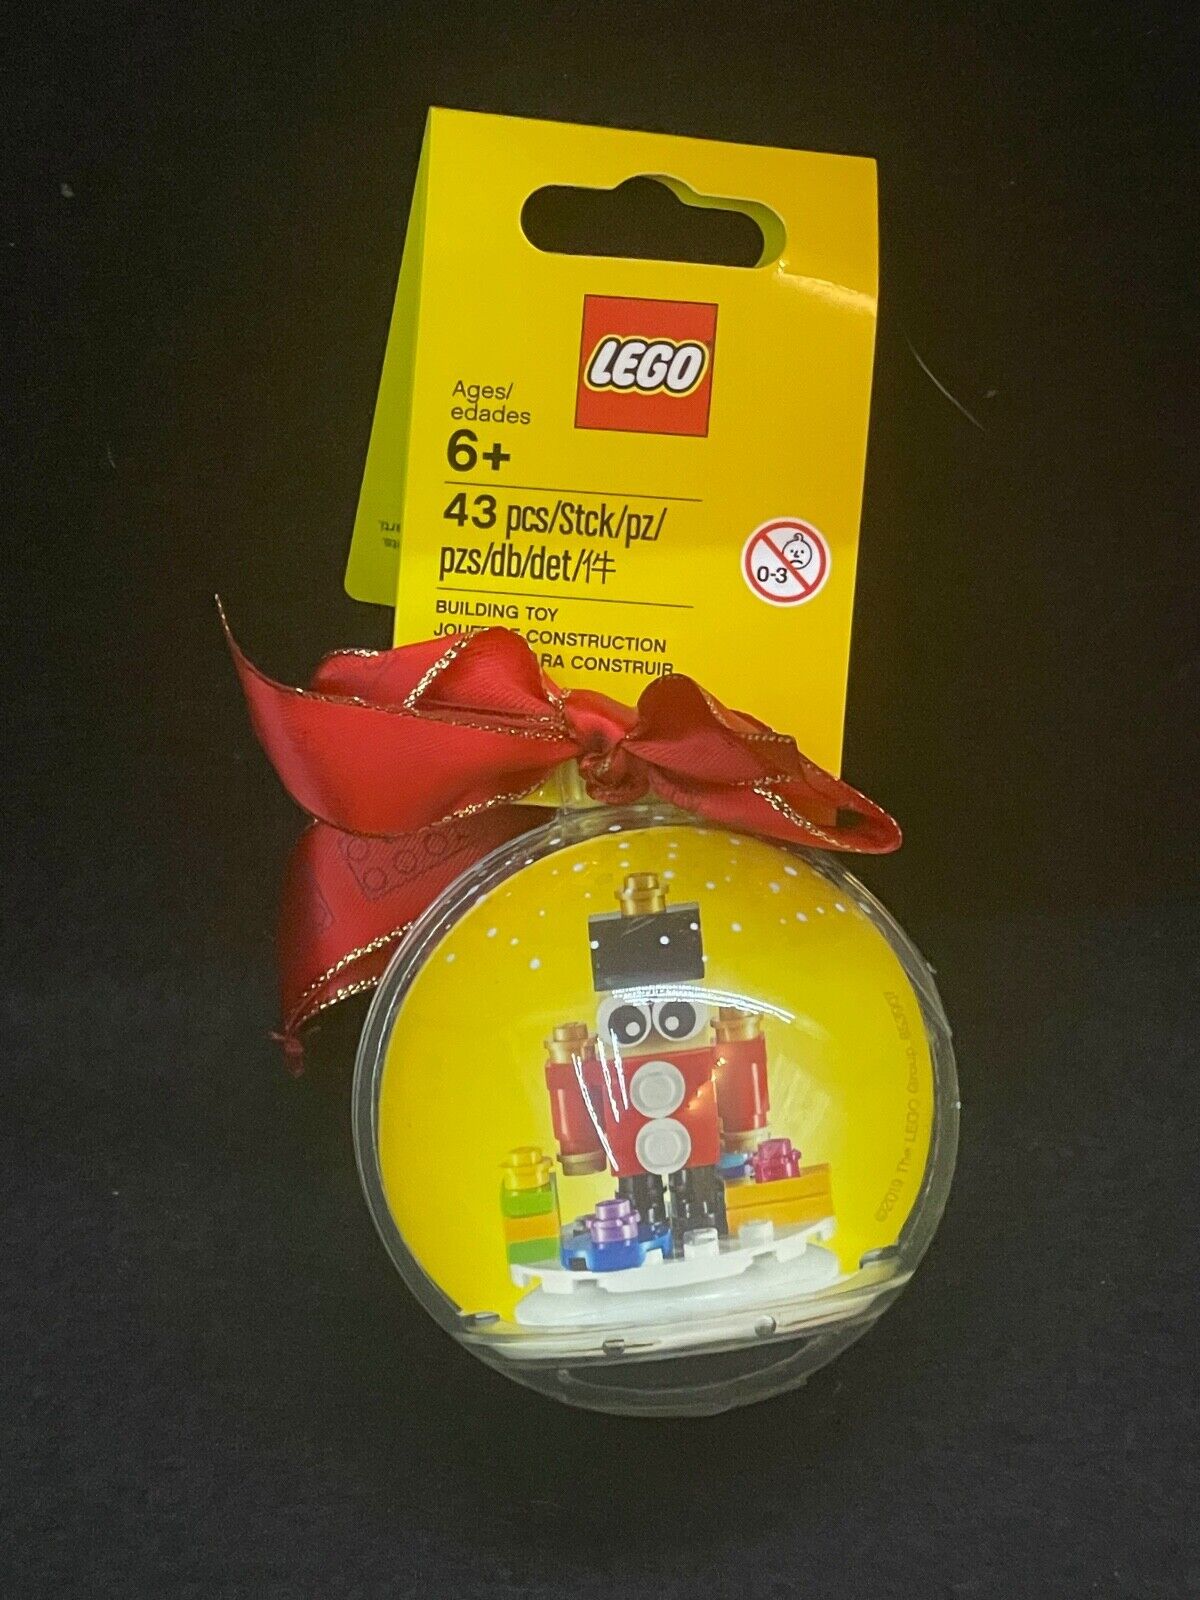 LEGO 853907 2019 Toy Soldier Ornament Holiday Bauble New Free Shipping